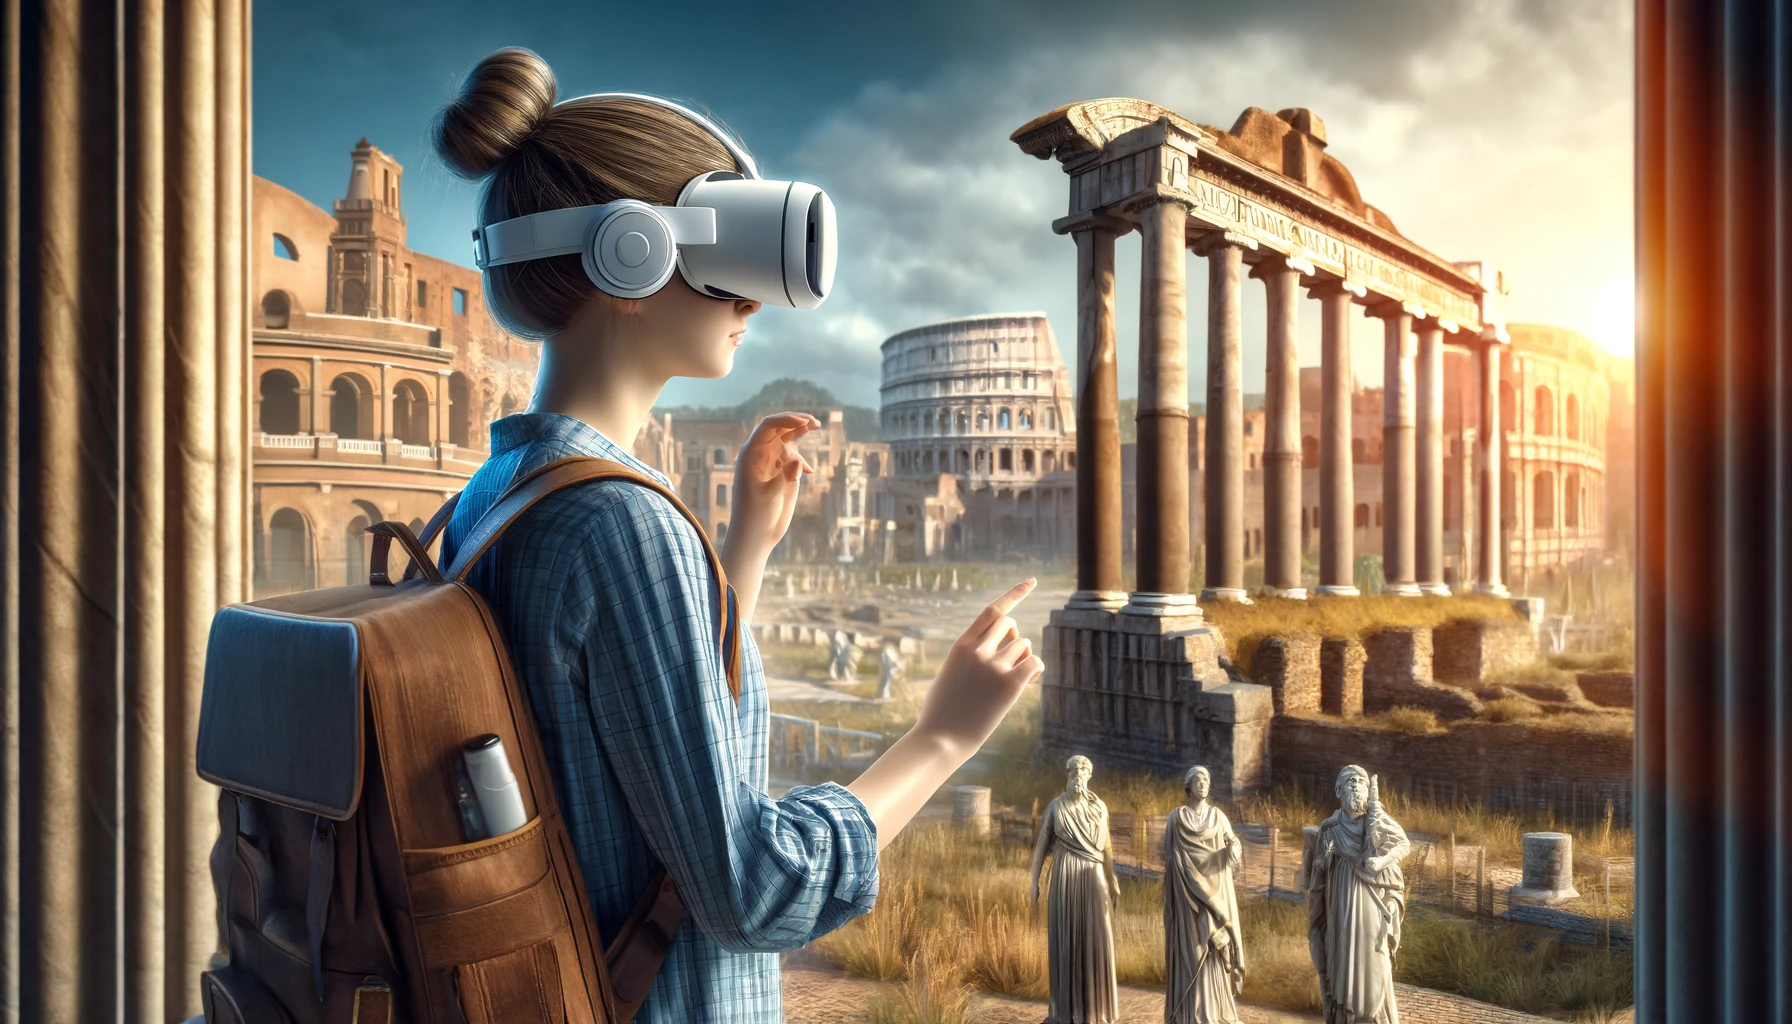 A high school student using virtual reality to walk through ancient Rome, interacting with virtual characters and historical landmarks. The image captures the student, a teenager, wearing a VR viewer, in a detail-rich environment that includes famous structures such as the Colosseum and the Forum.